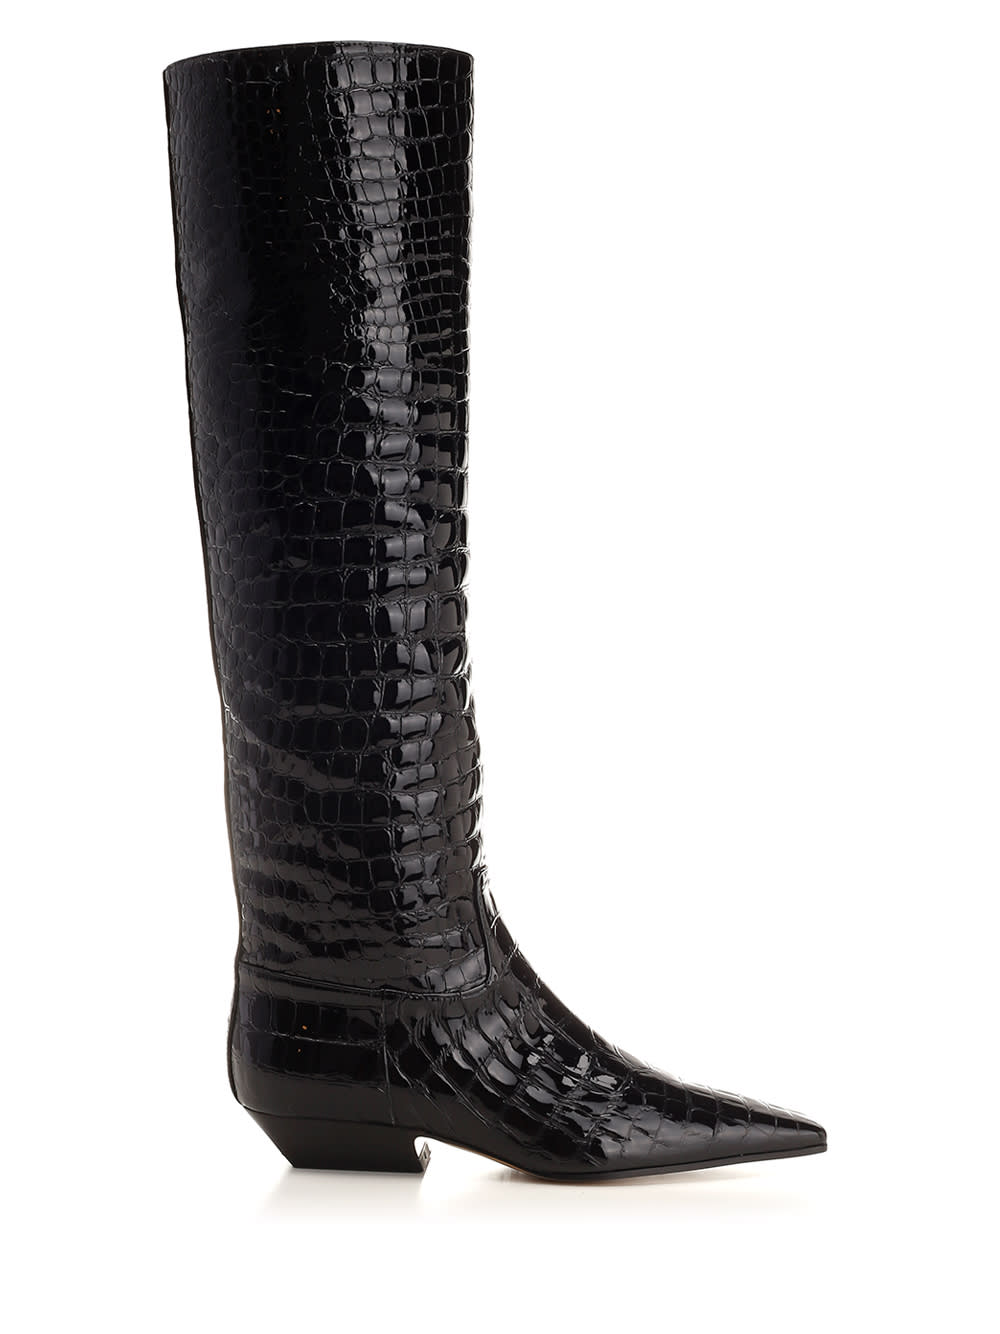 Khaite Embossed Leather High Boots